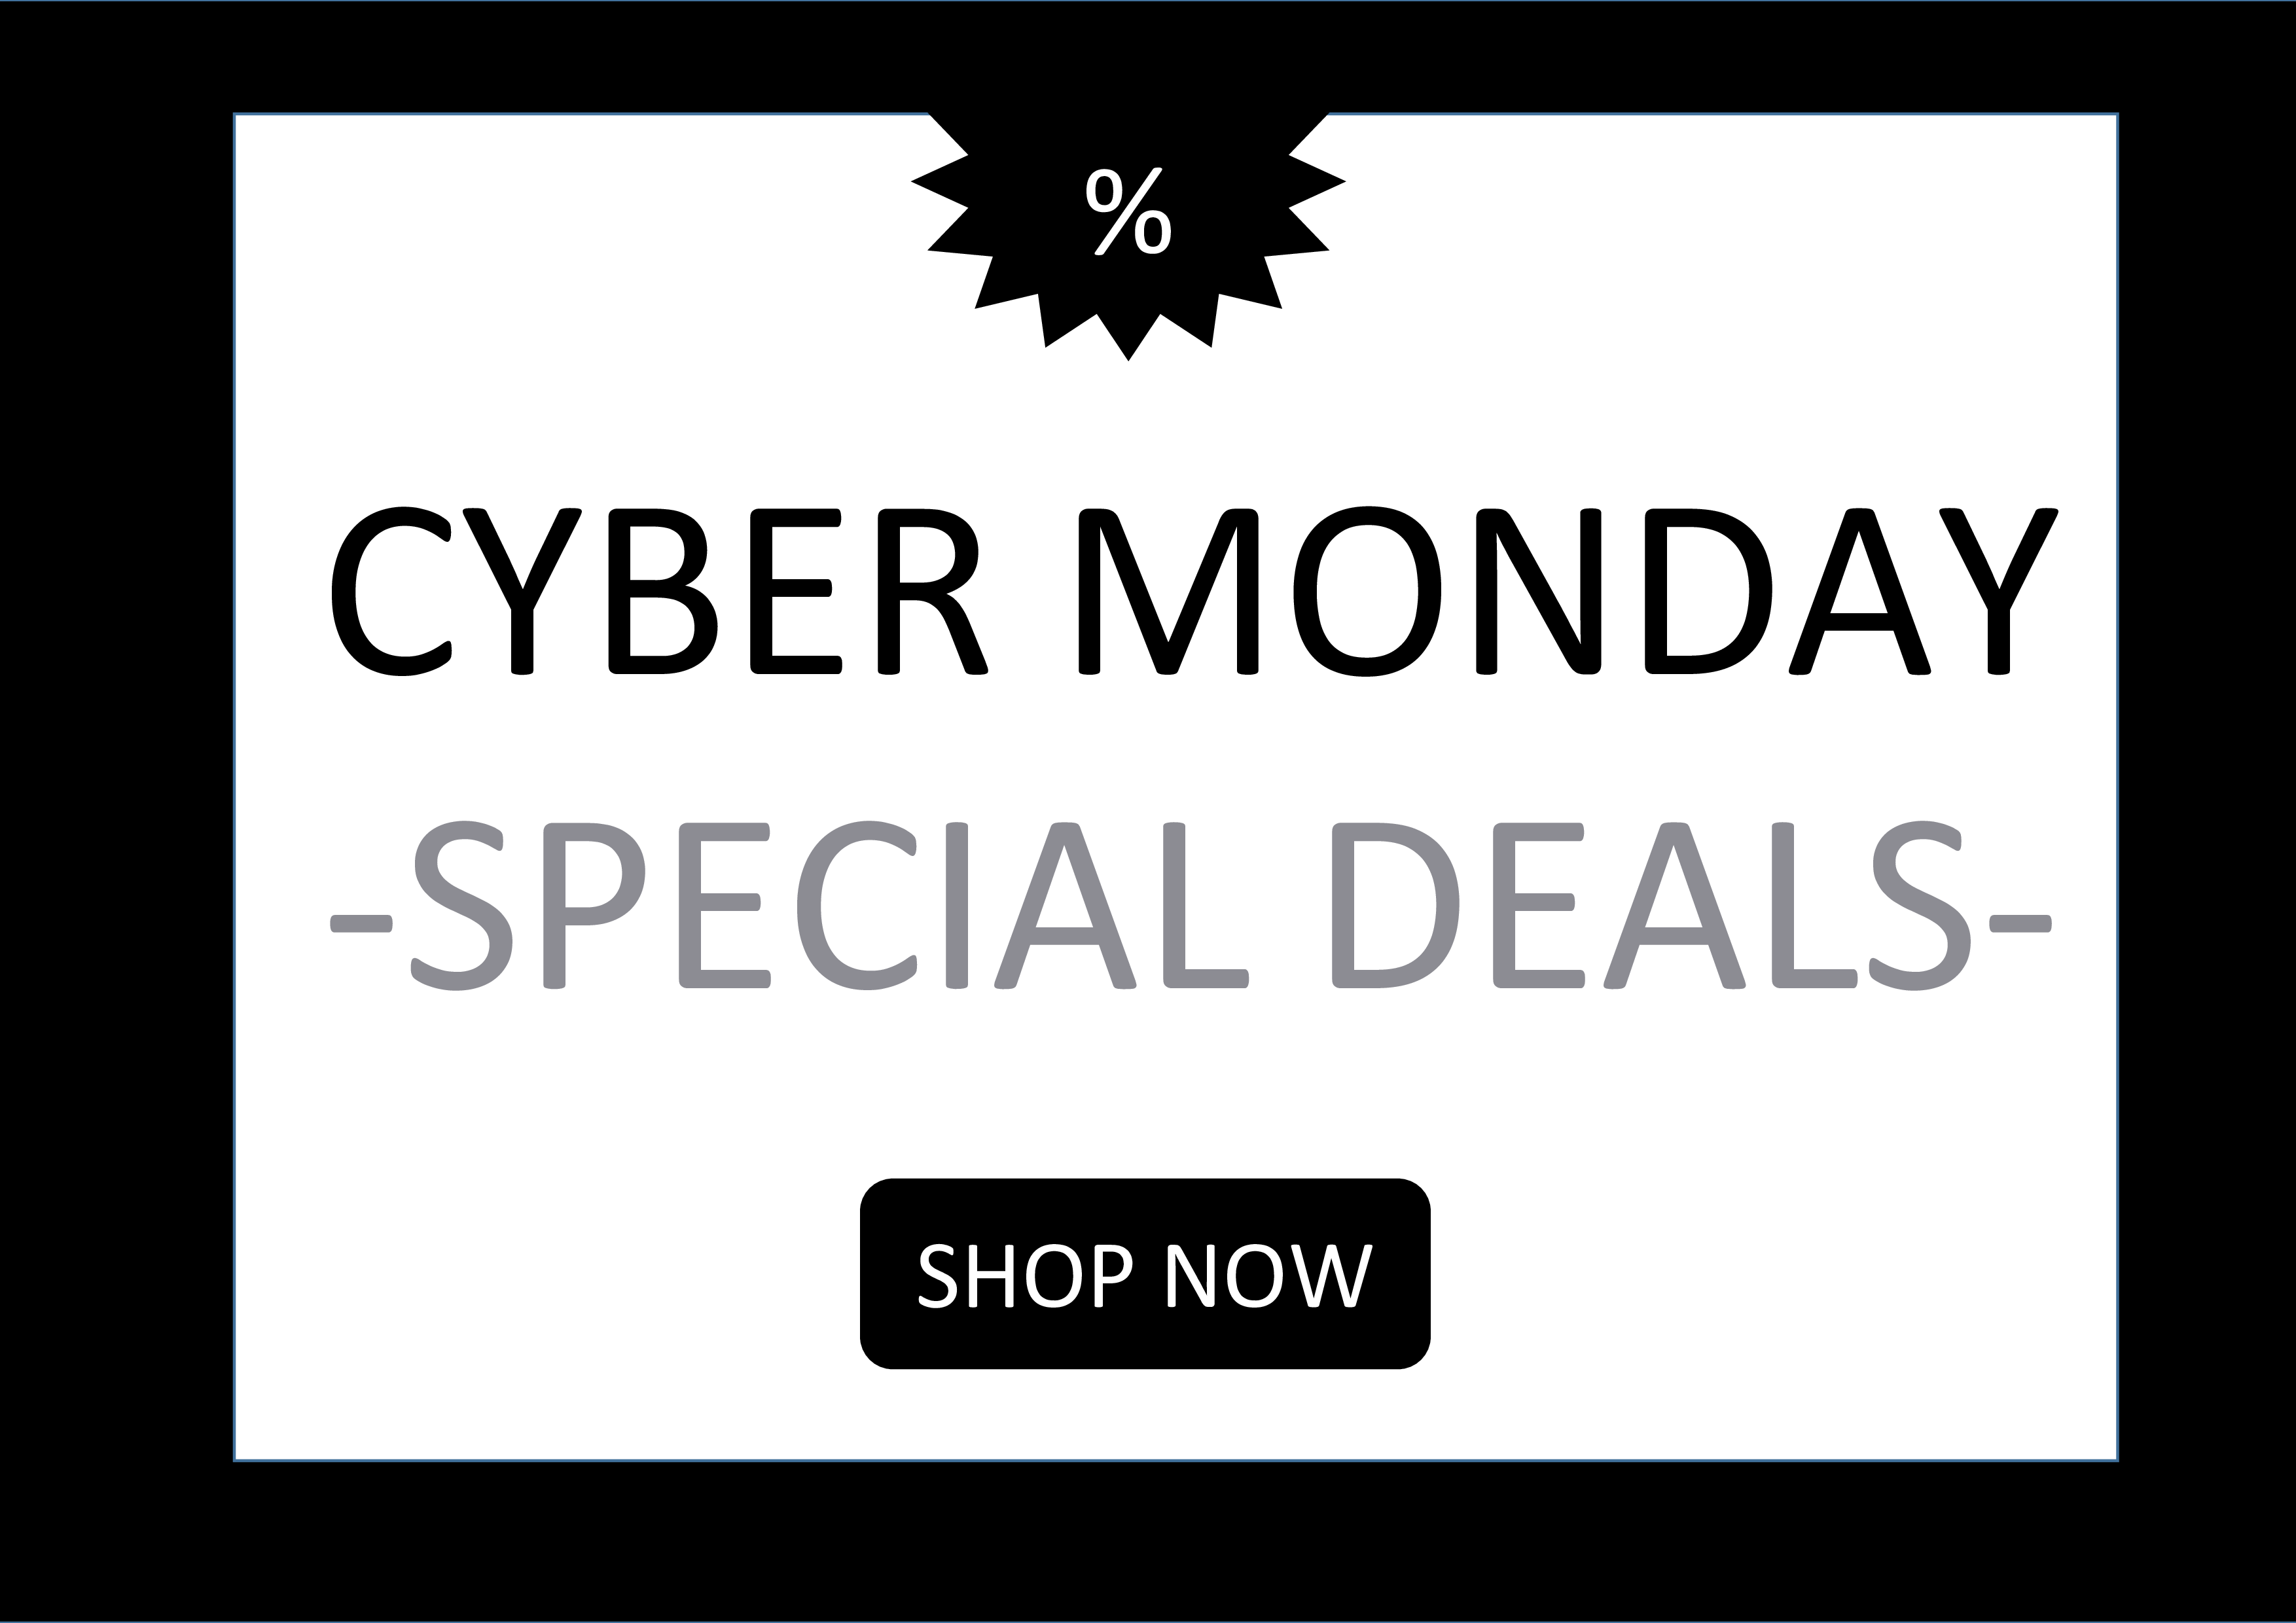 Cyber Monday Sales Poster main image